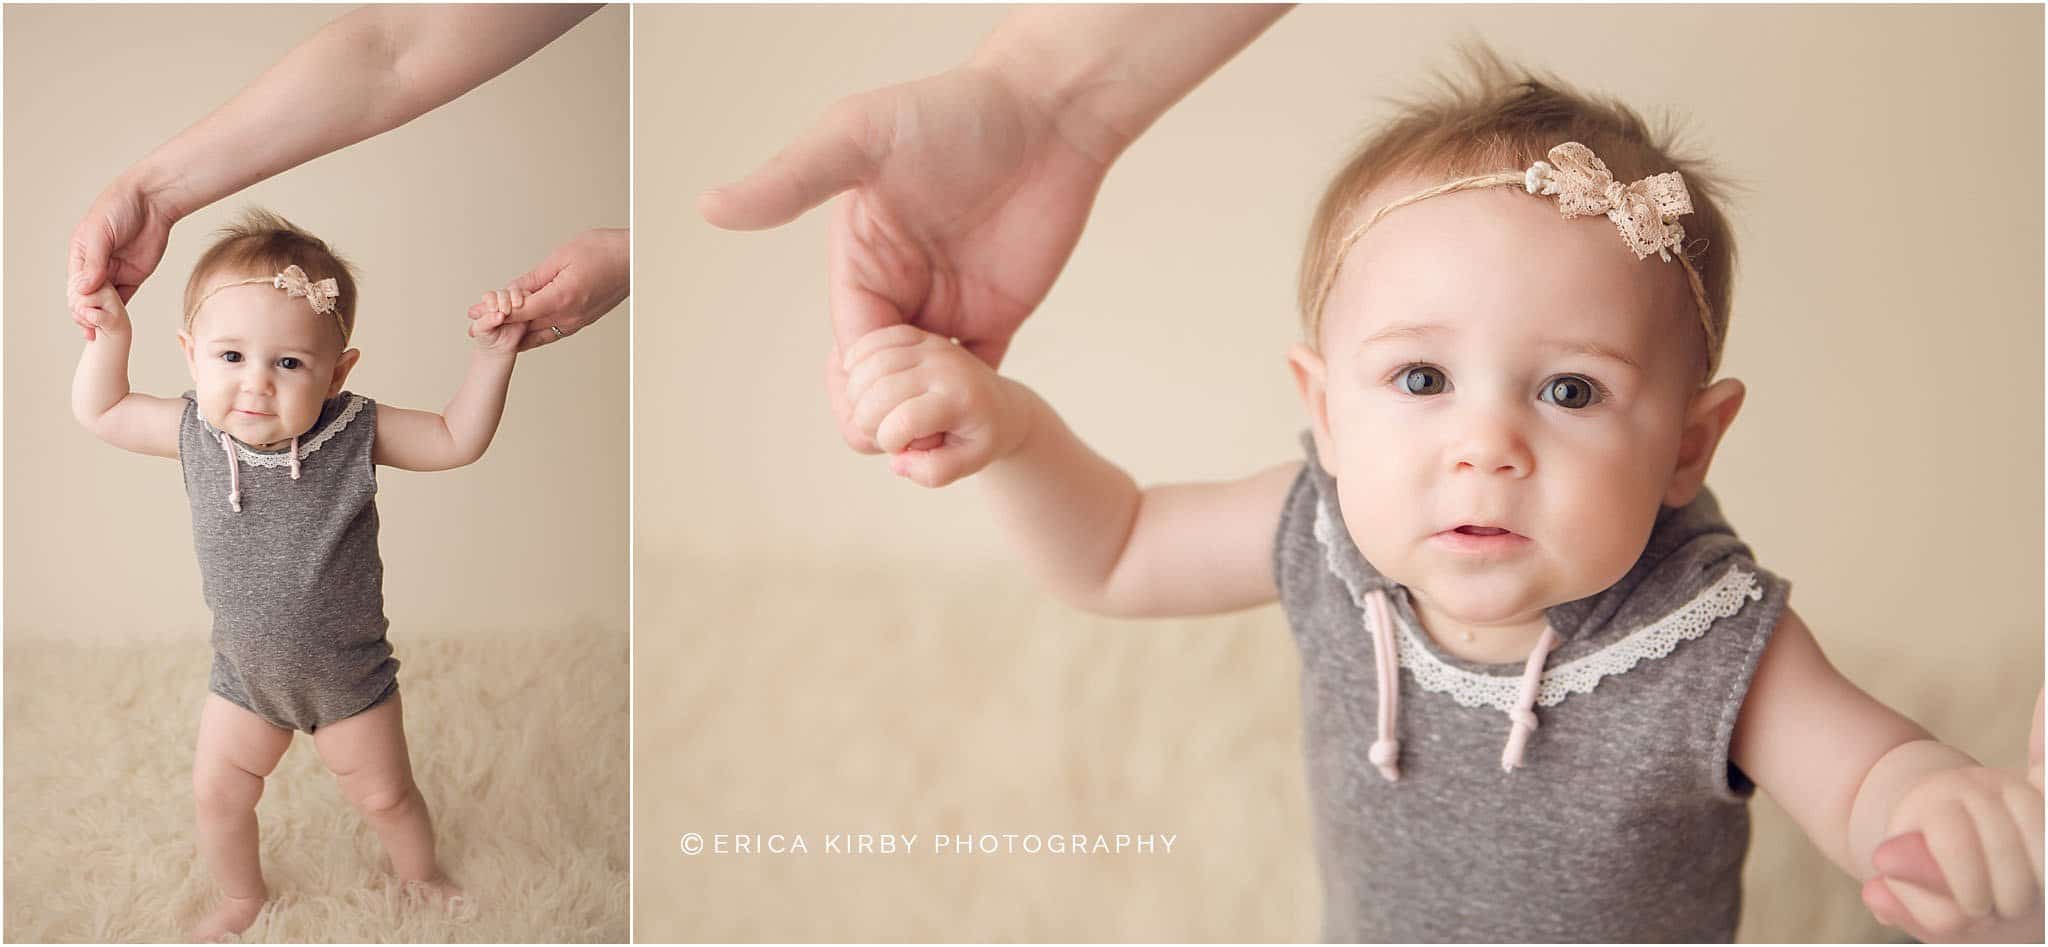 Northwest AR Baby Photography 9 Month old baby girl milestone session in Bentonville AR photography studio with creams and purples | Erica Kirby Photography - NWA Baby Photographer